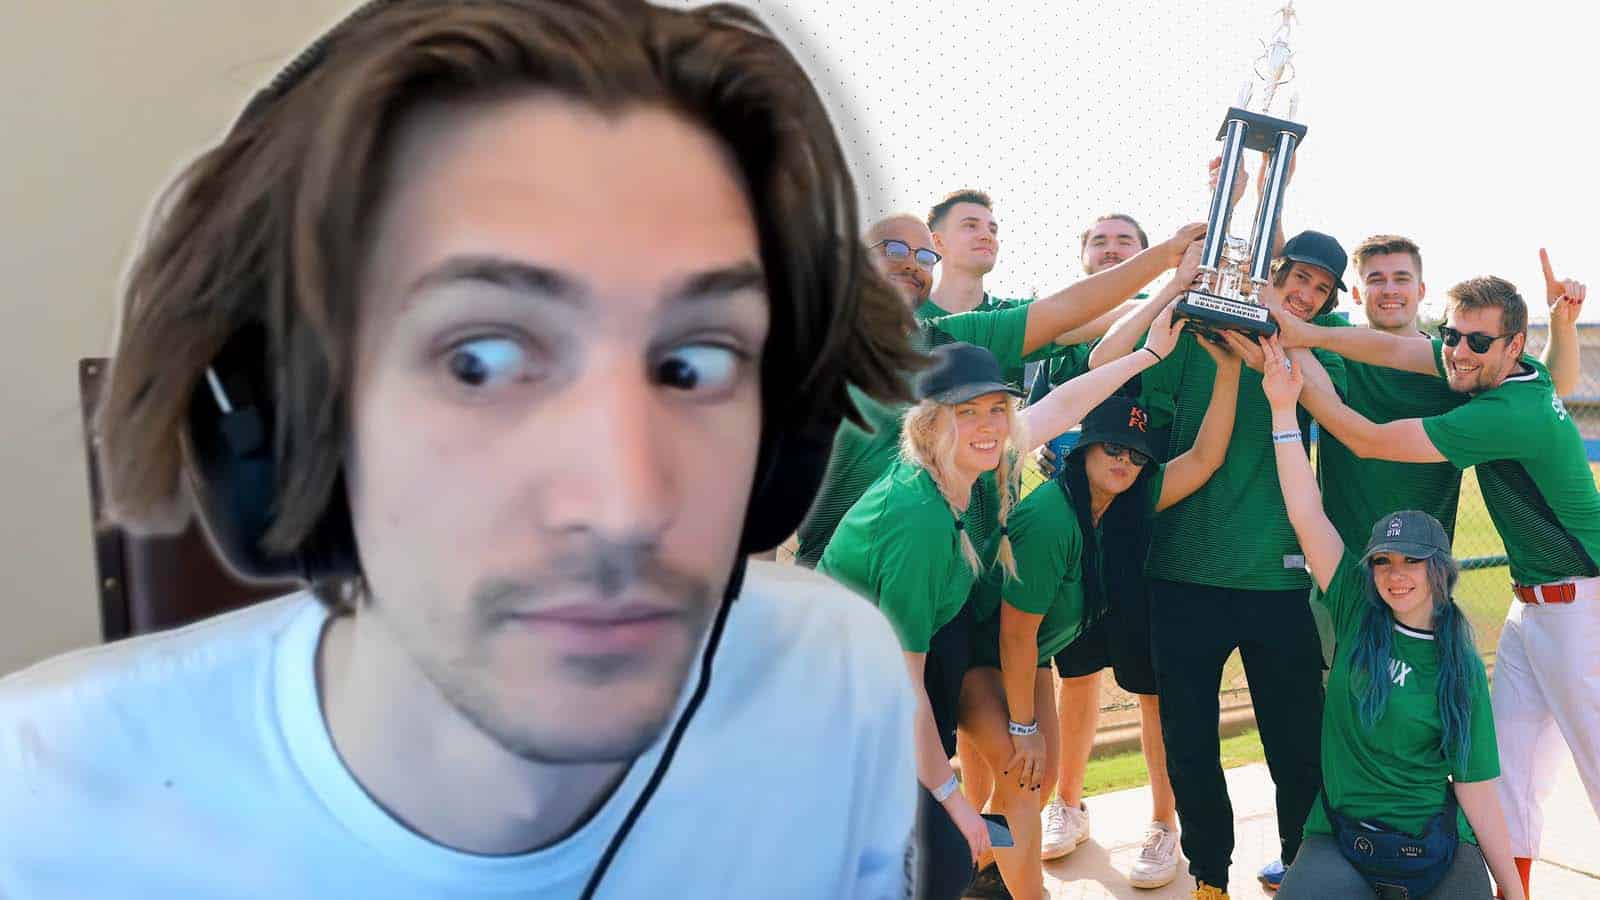 xQc teases future Twitch collabs after Shitcamp success: "The stream is going to pop off"